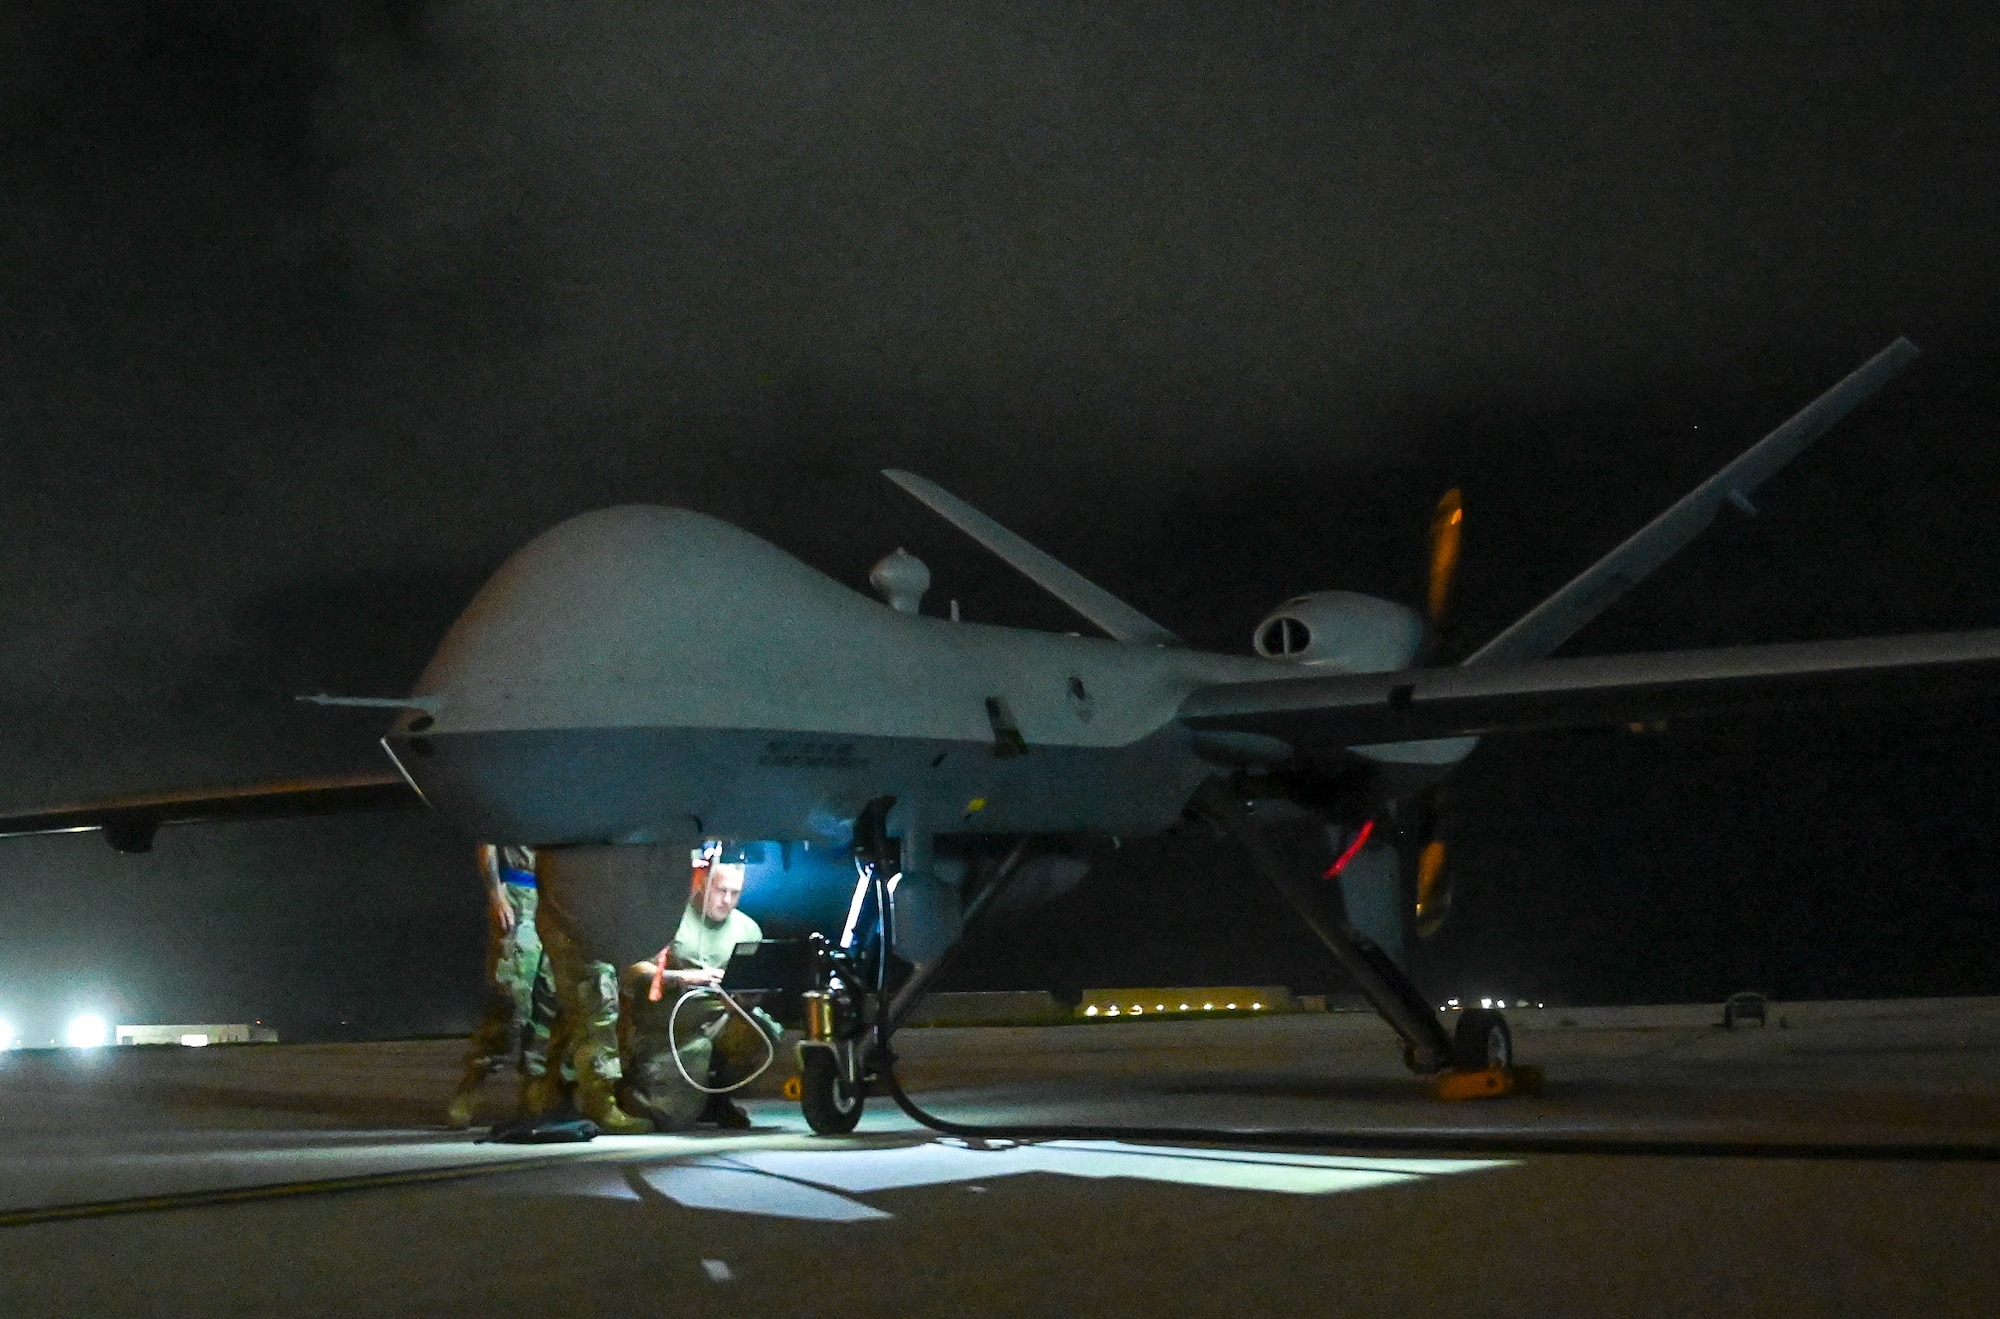 Airmen from the 556th Test and Evaluation Squadron preflight a MQ-9 Reaper at Andersen Air Force Base, Guam, Oct. 4, 2021. The Reaper was flown from Marine Corps Base, Hawaii, during its participation in Exercise Ace Reaper.  The purpose of ACE Reaper is to demonstrate the MQ-9’s capabilities and service members’ abilities to rapidly mobilize and integrate across multiple domains. The exercise also serves as an opportunity to train in a maritime environment and in a different airspace. (U.S. Air Force photo by Staff Sgt. Divine Cox)